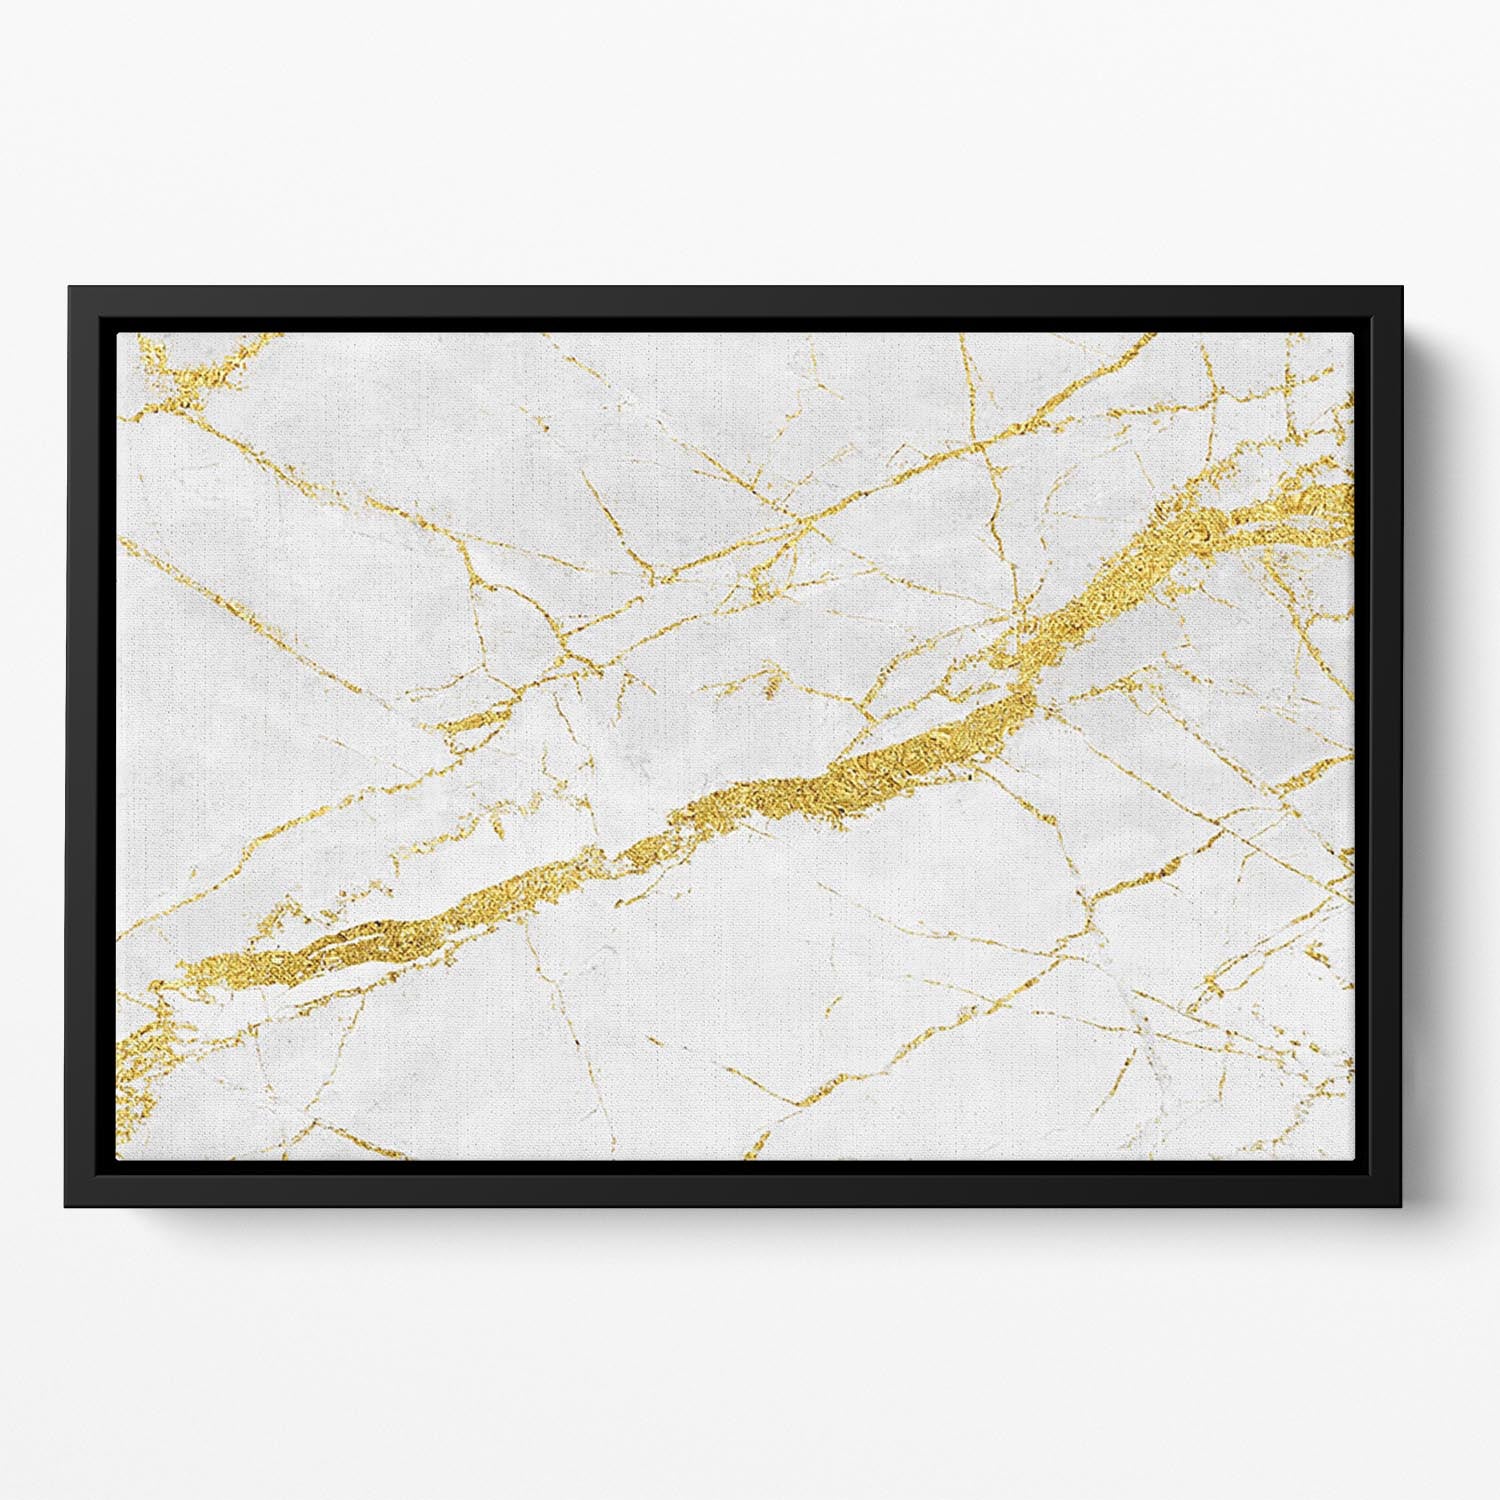 White and Gold Cracked Marble Floating Framed Canvas - Canvas Art Rocks - 2